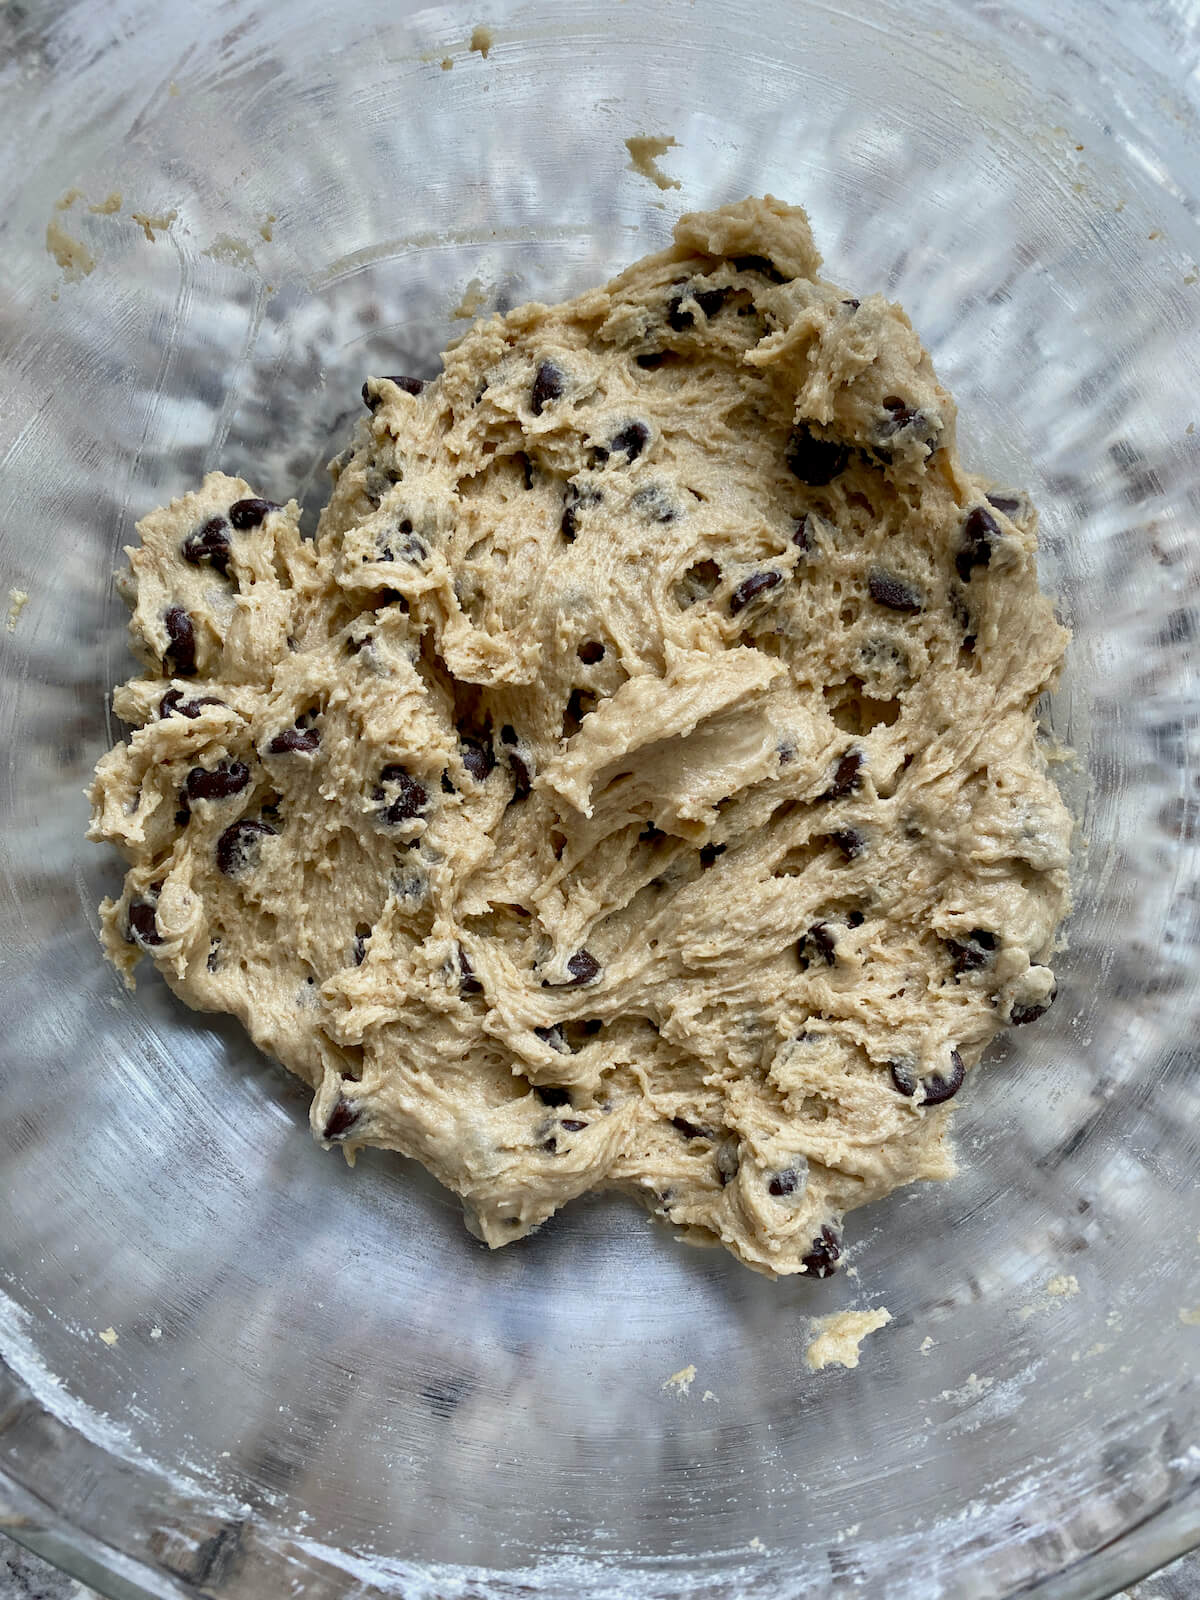 Sourdough chocolate chip cookie dough in a glass mixing bowl.